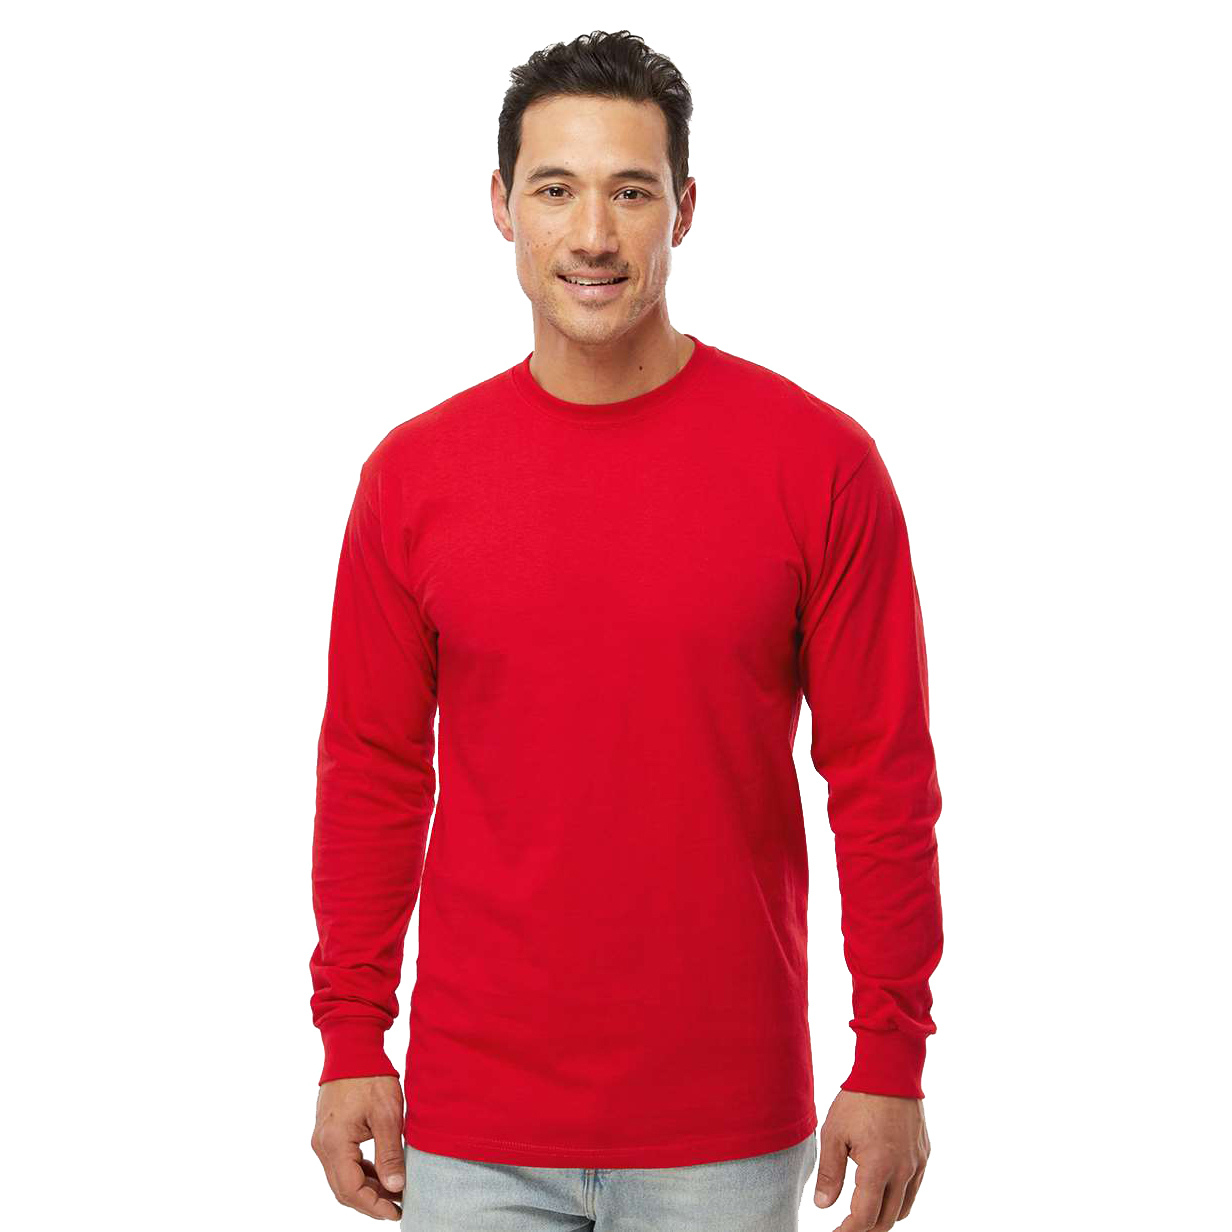 M&O 4820 Gold Soft Touch Long Sleeve T-Shirt - Deep Red | Full Source